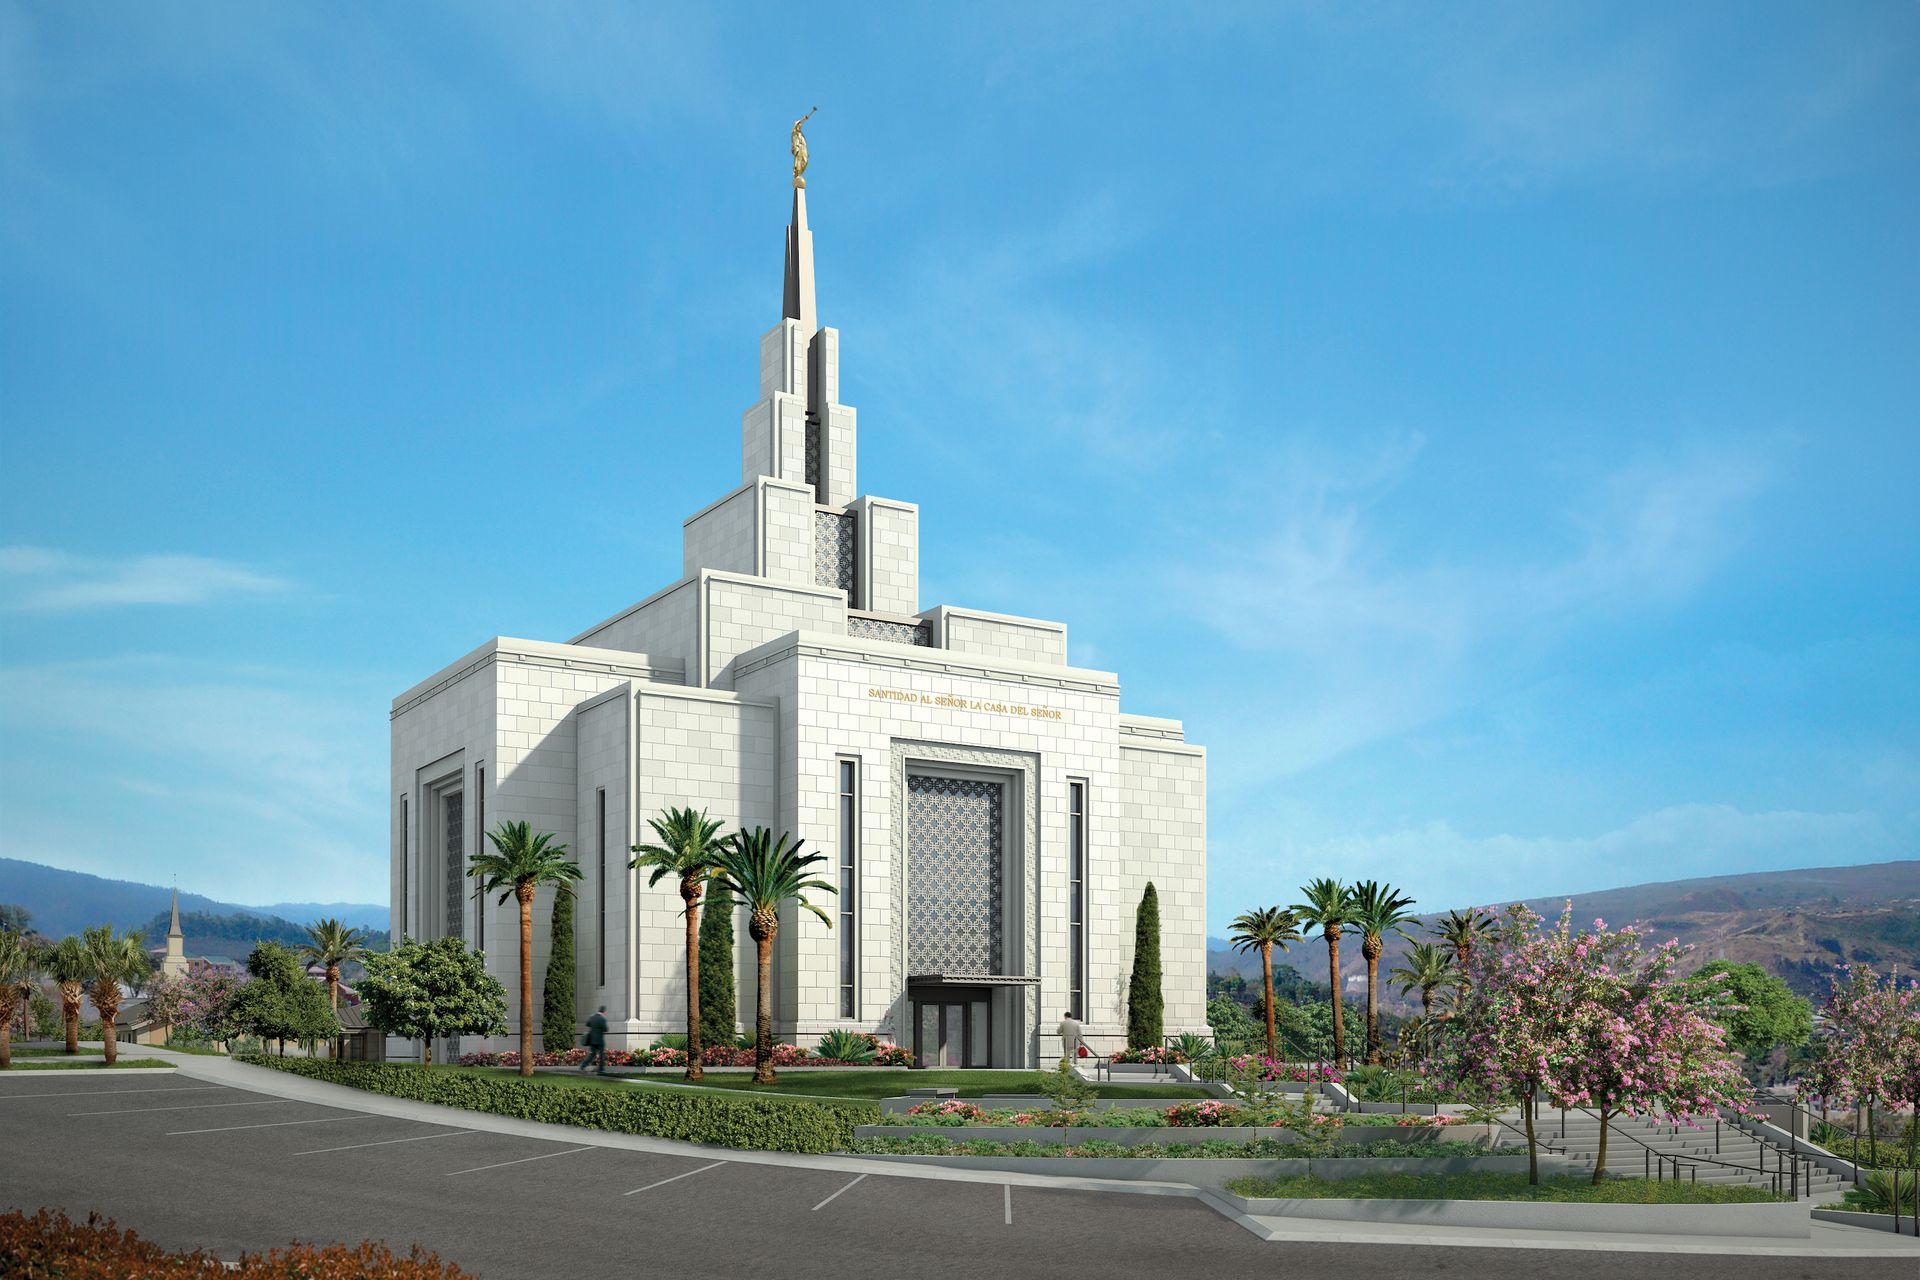 The entire Tegucigalpa Honduras Temple, including the entrance and scenery.